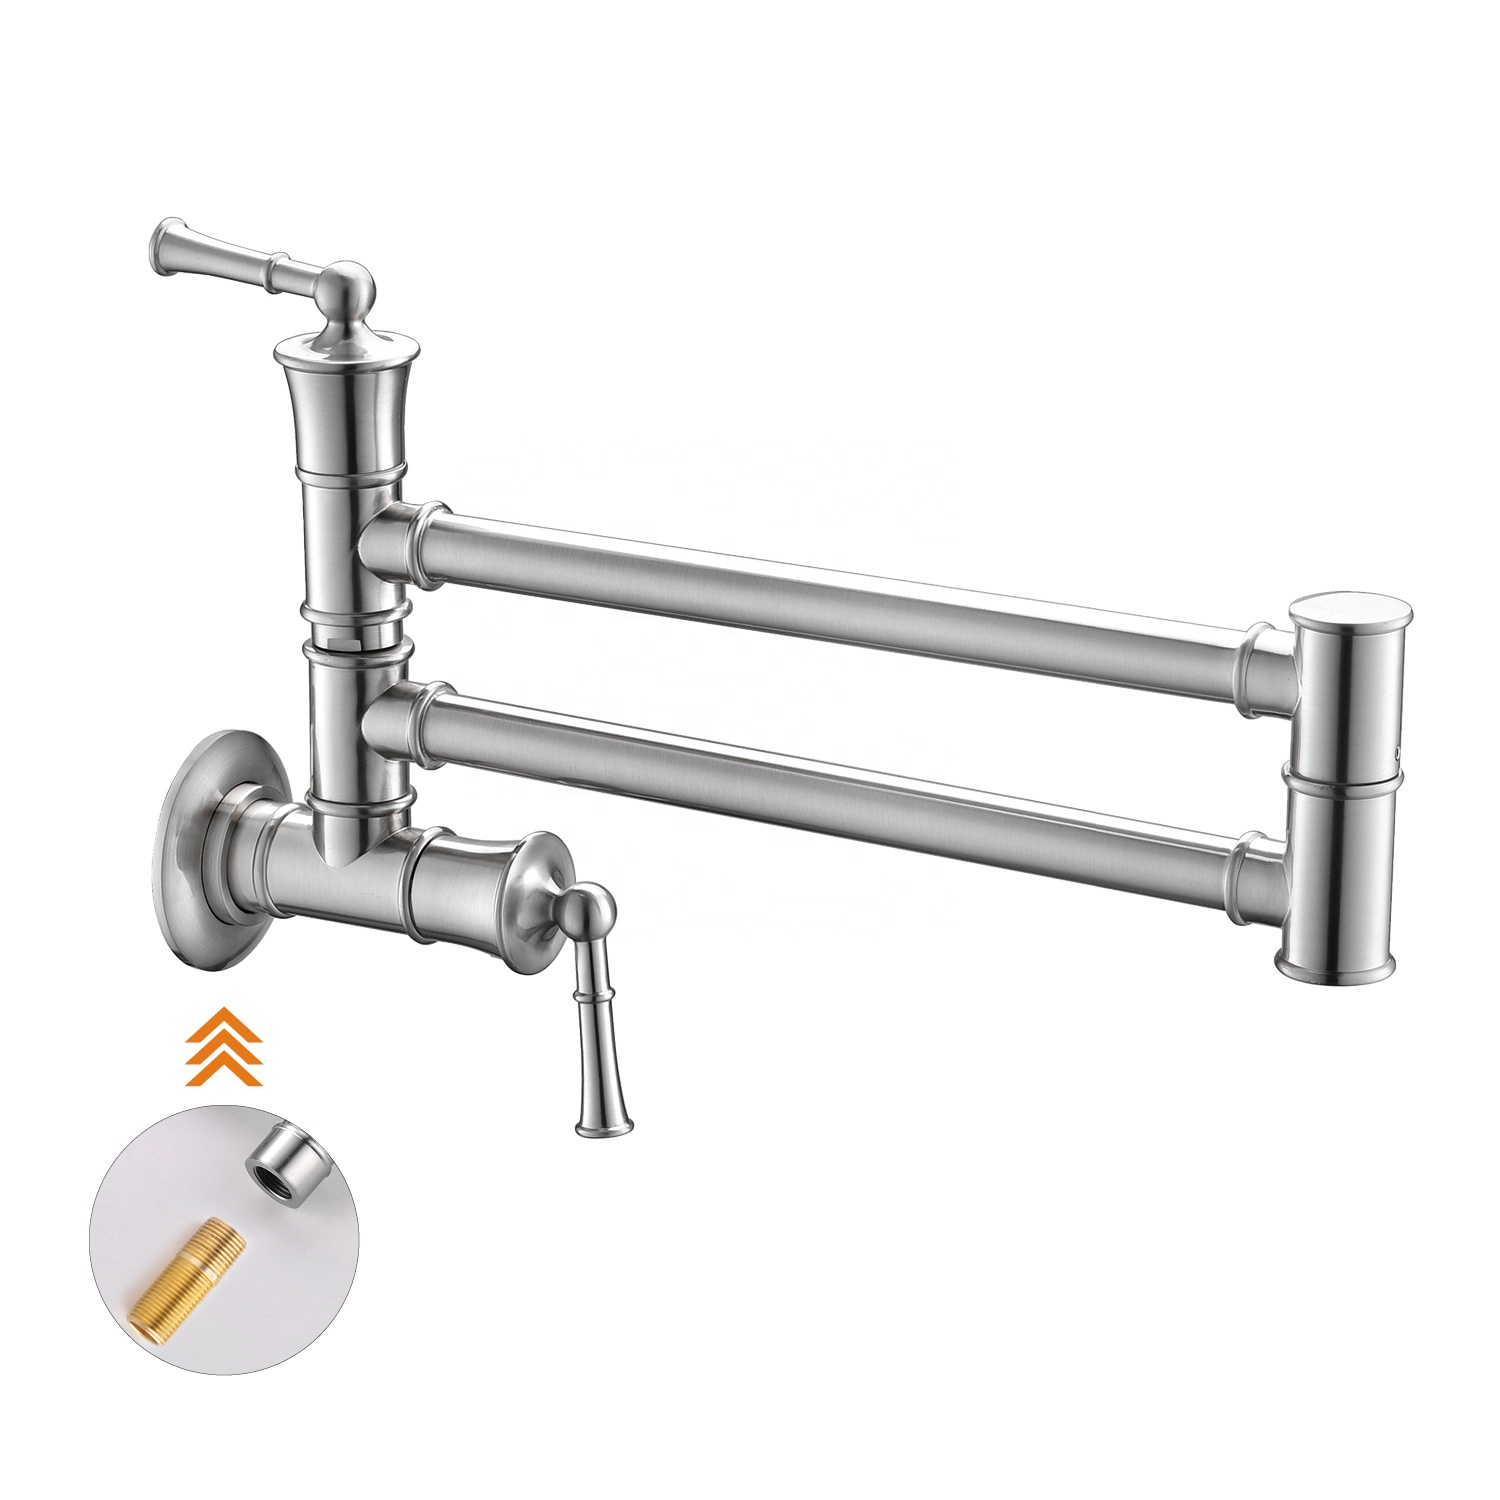 Folding Sink Faucet Kitchen Faucets Canada Folding Down Kitchen Faucet In Brushed Nickel